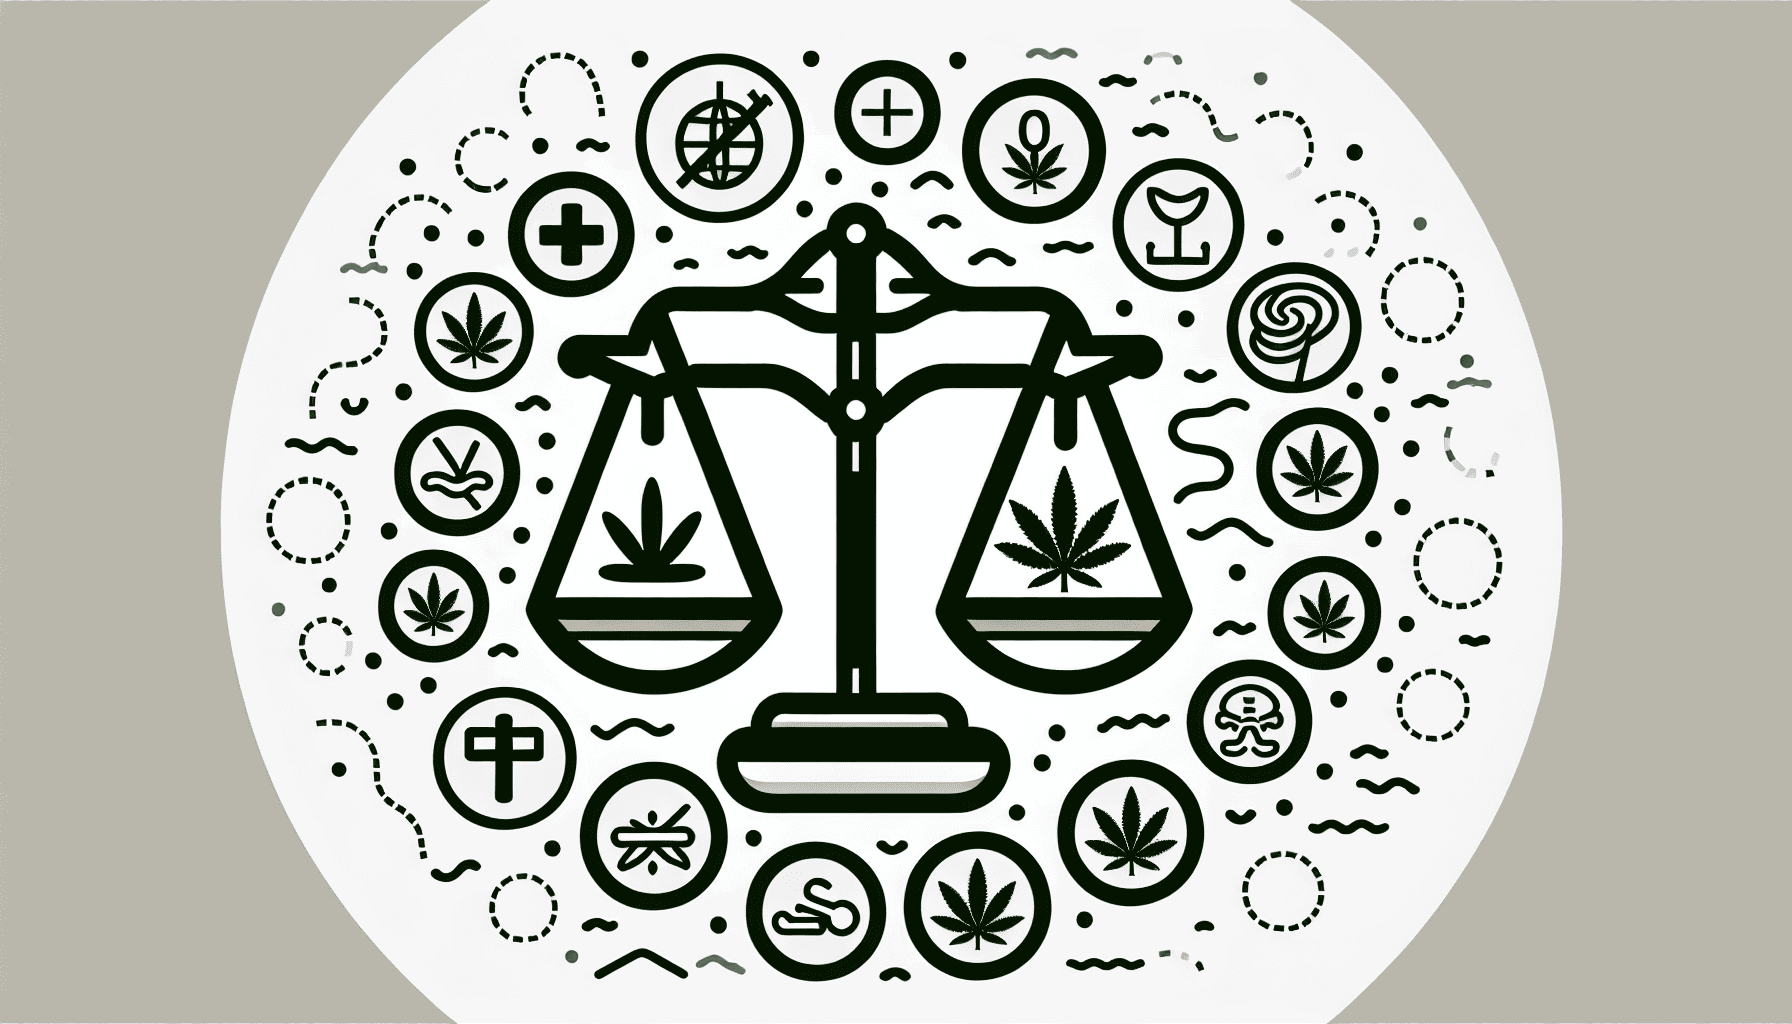 What Are The Personal Marijuana Use And Possession Limit Laws?